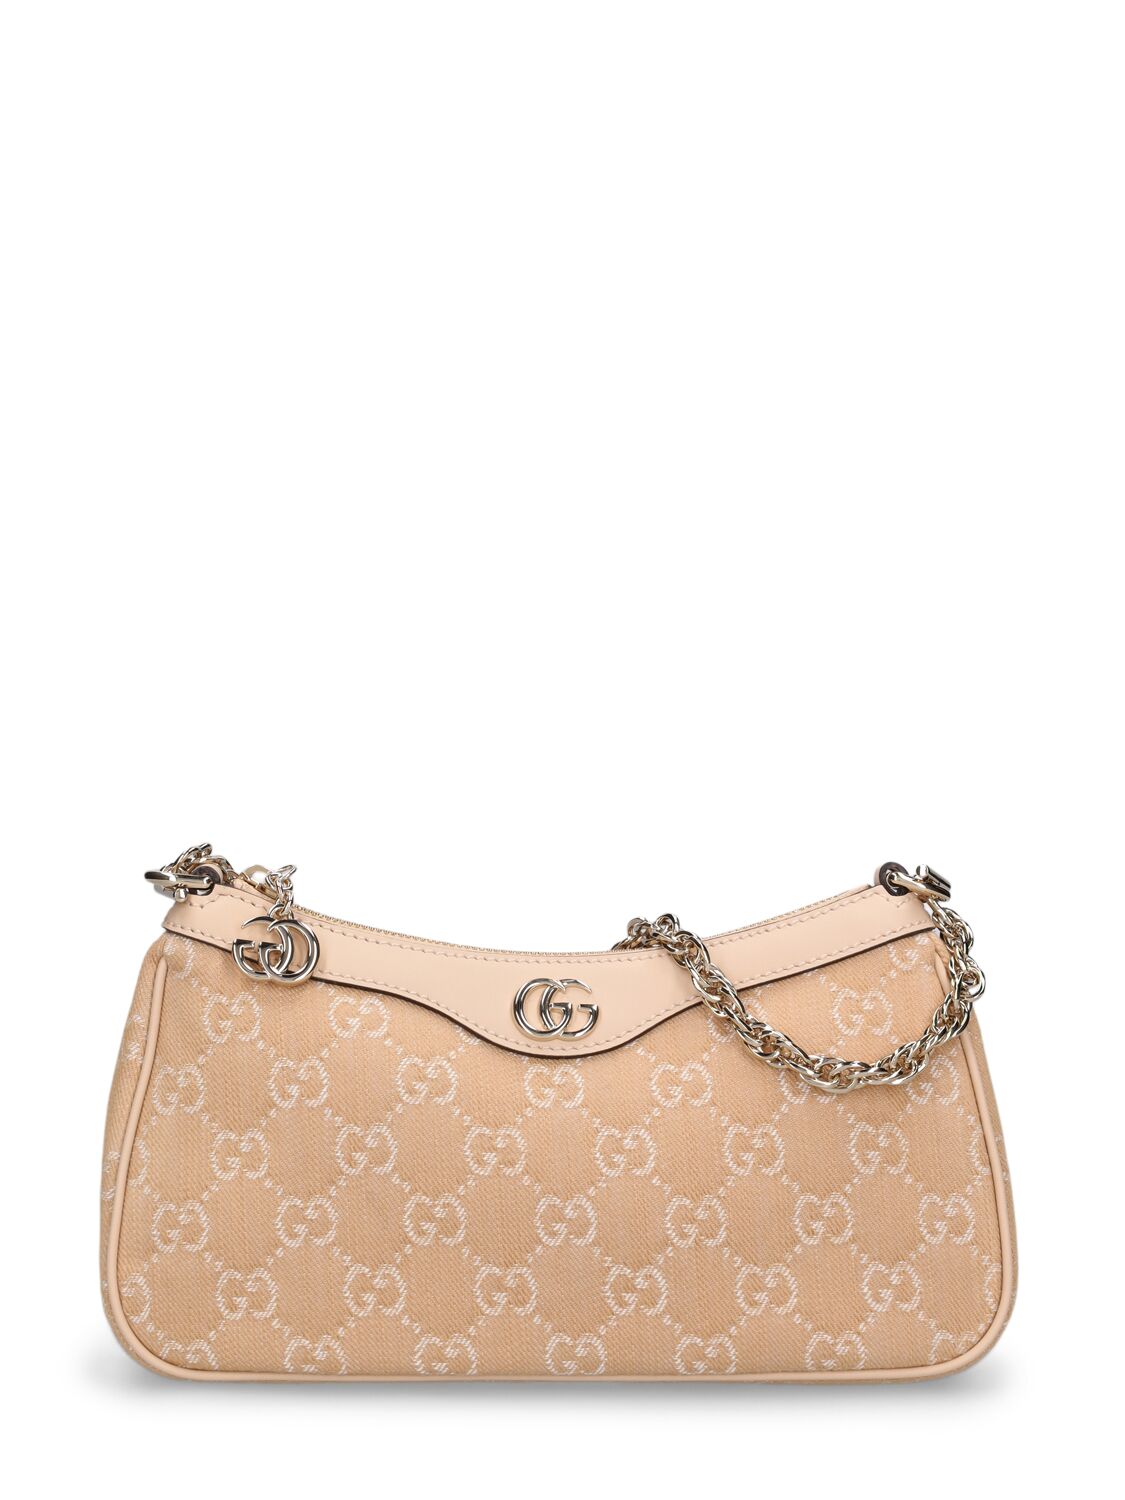 Gucci Ophidia Gg牛仔单肩包 In Pink